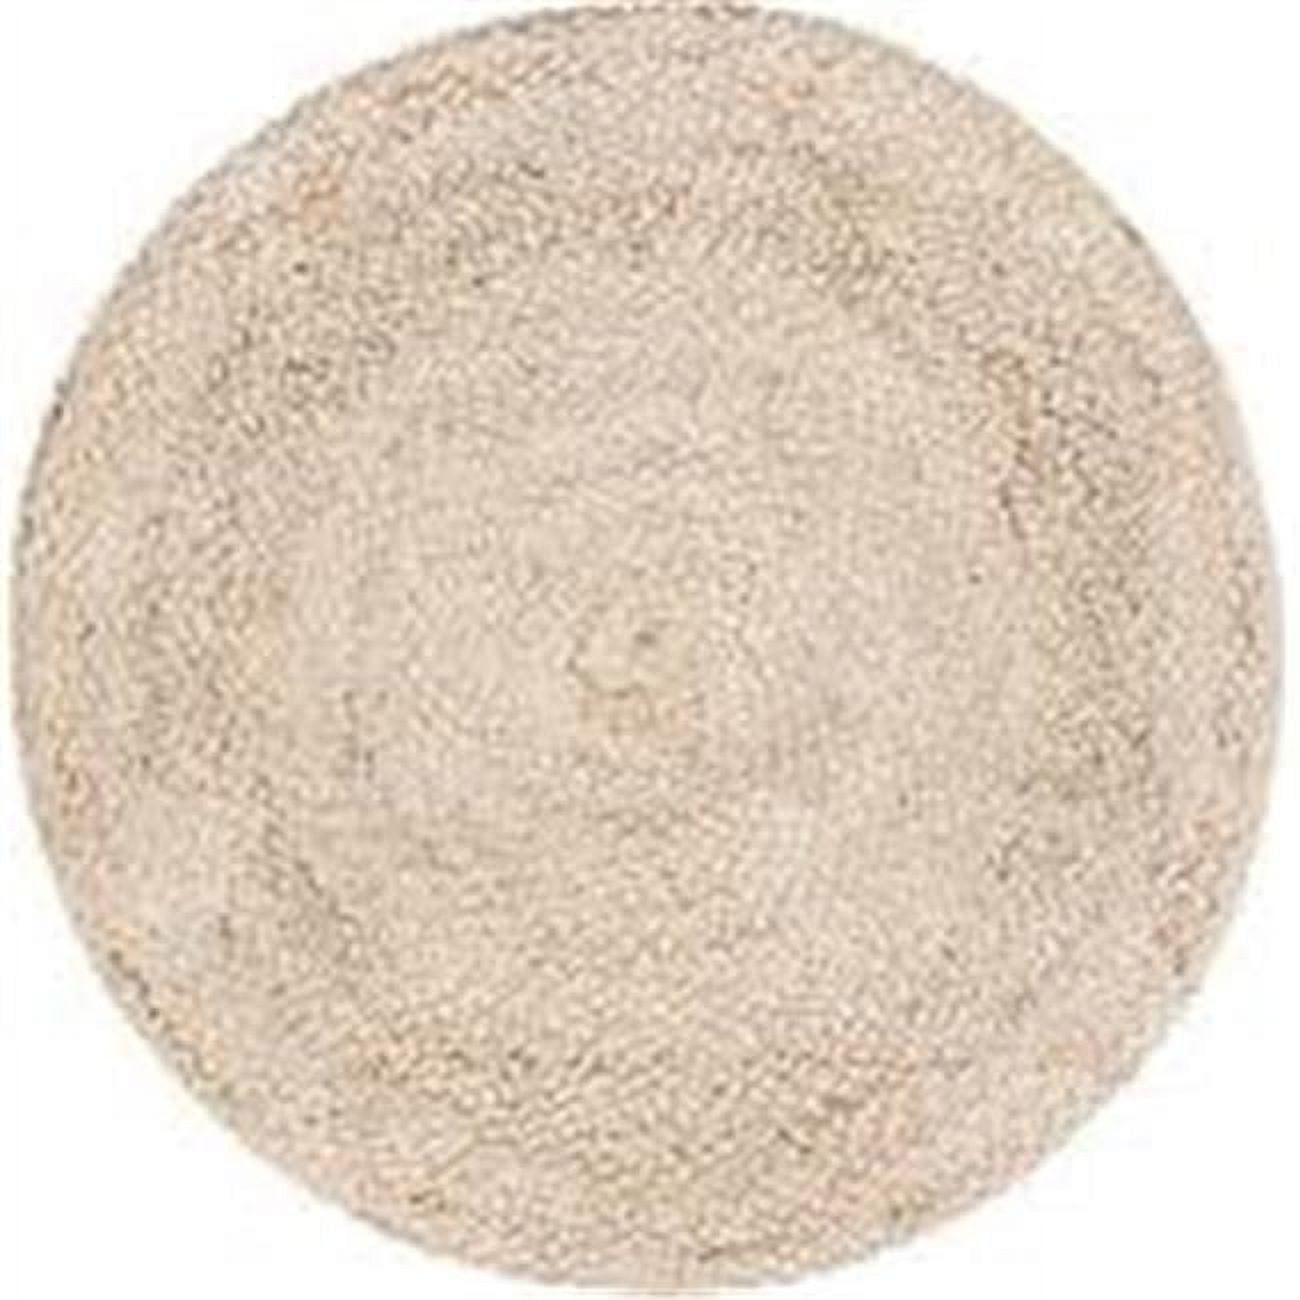 Picture of Anji Mountain AMB0395-060R 6 x 6 ft. Round Speckled Hen Area Rug - Tan, Ivory